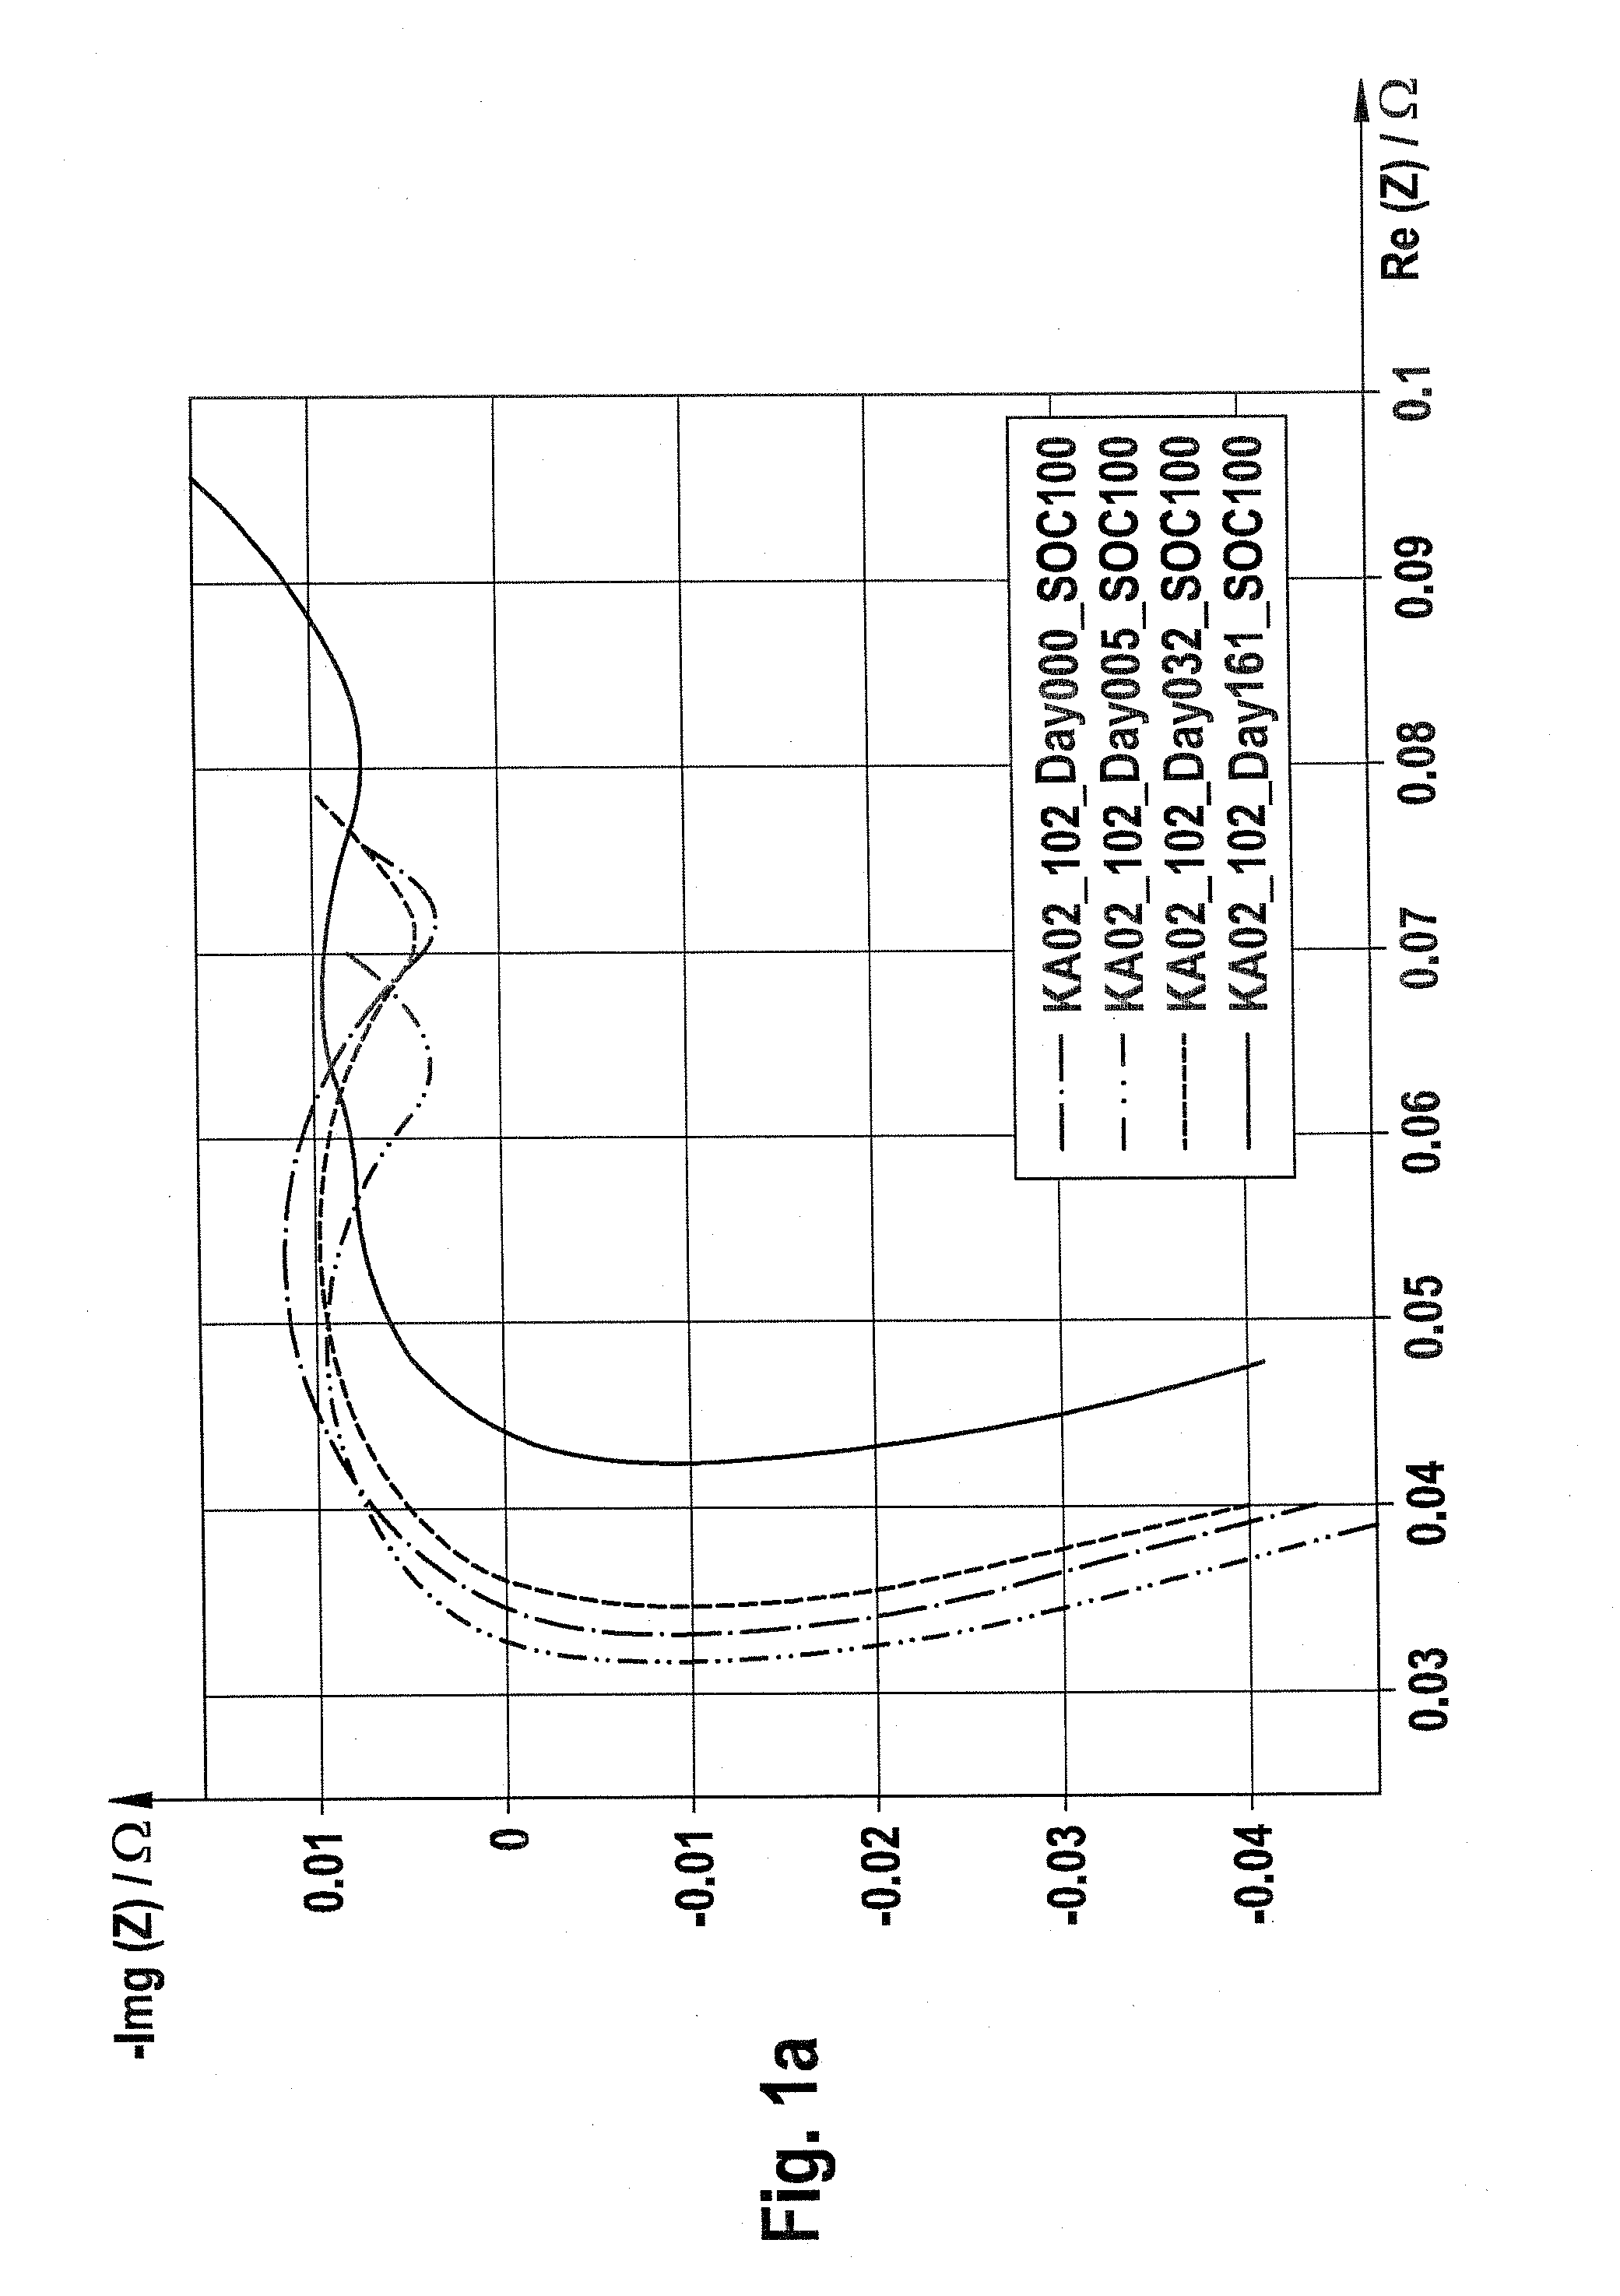 Method for determining an aging condition of a battery cell by means of impedance spectroscopy